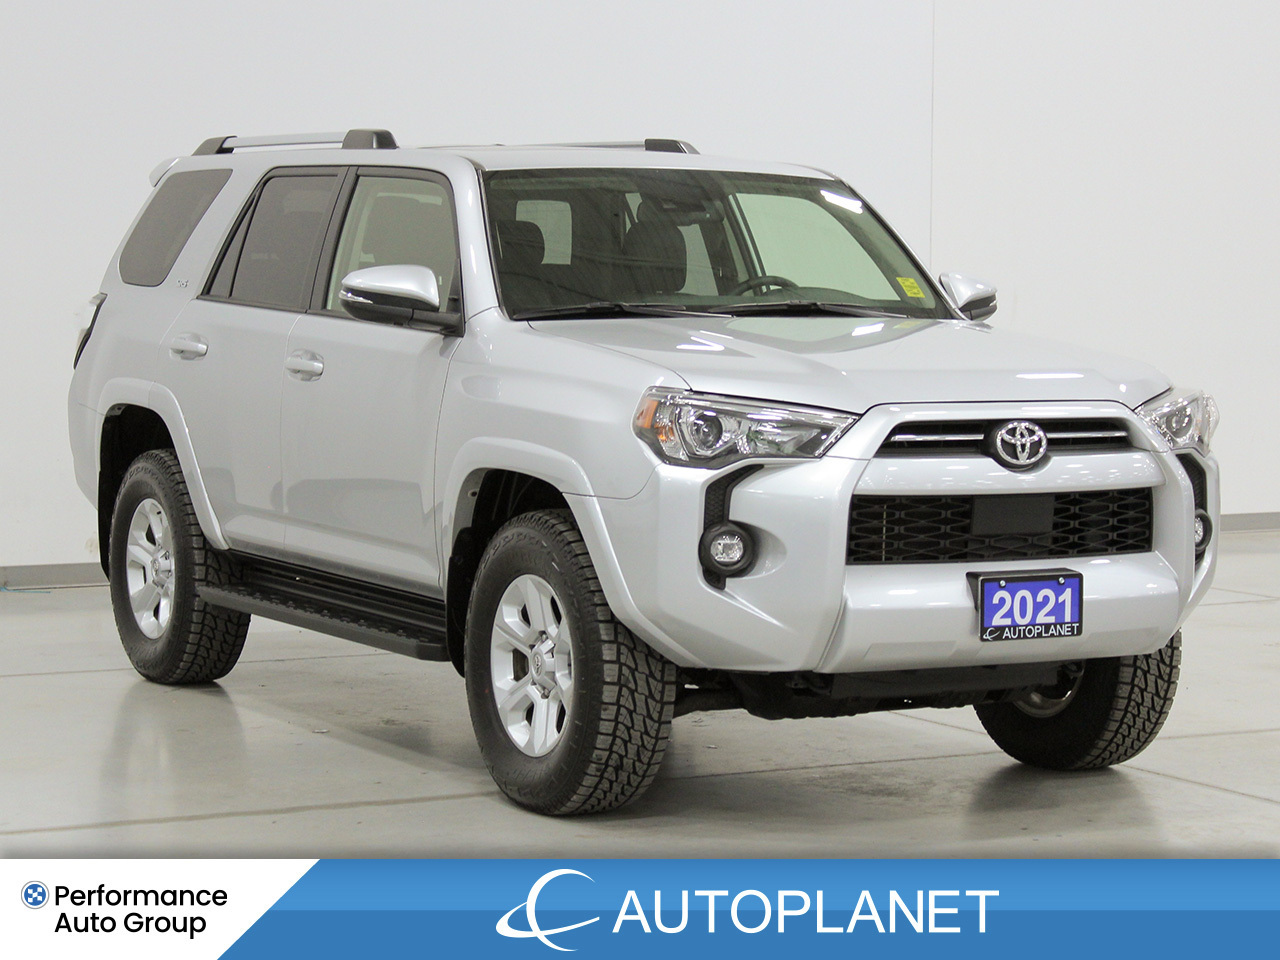 2021 Toyota 4Runner AWD, 7-Seater, Back Up Cam, Sunroof, Bluetooth!